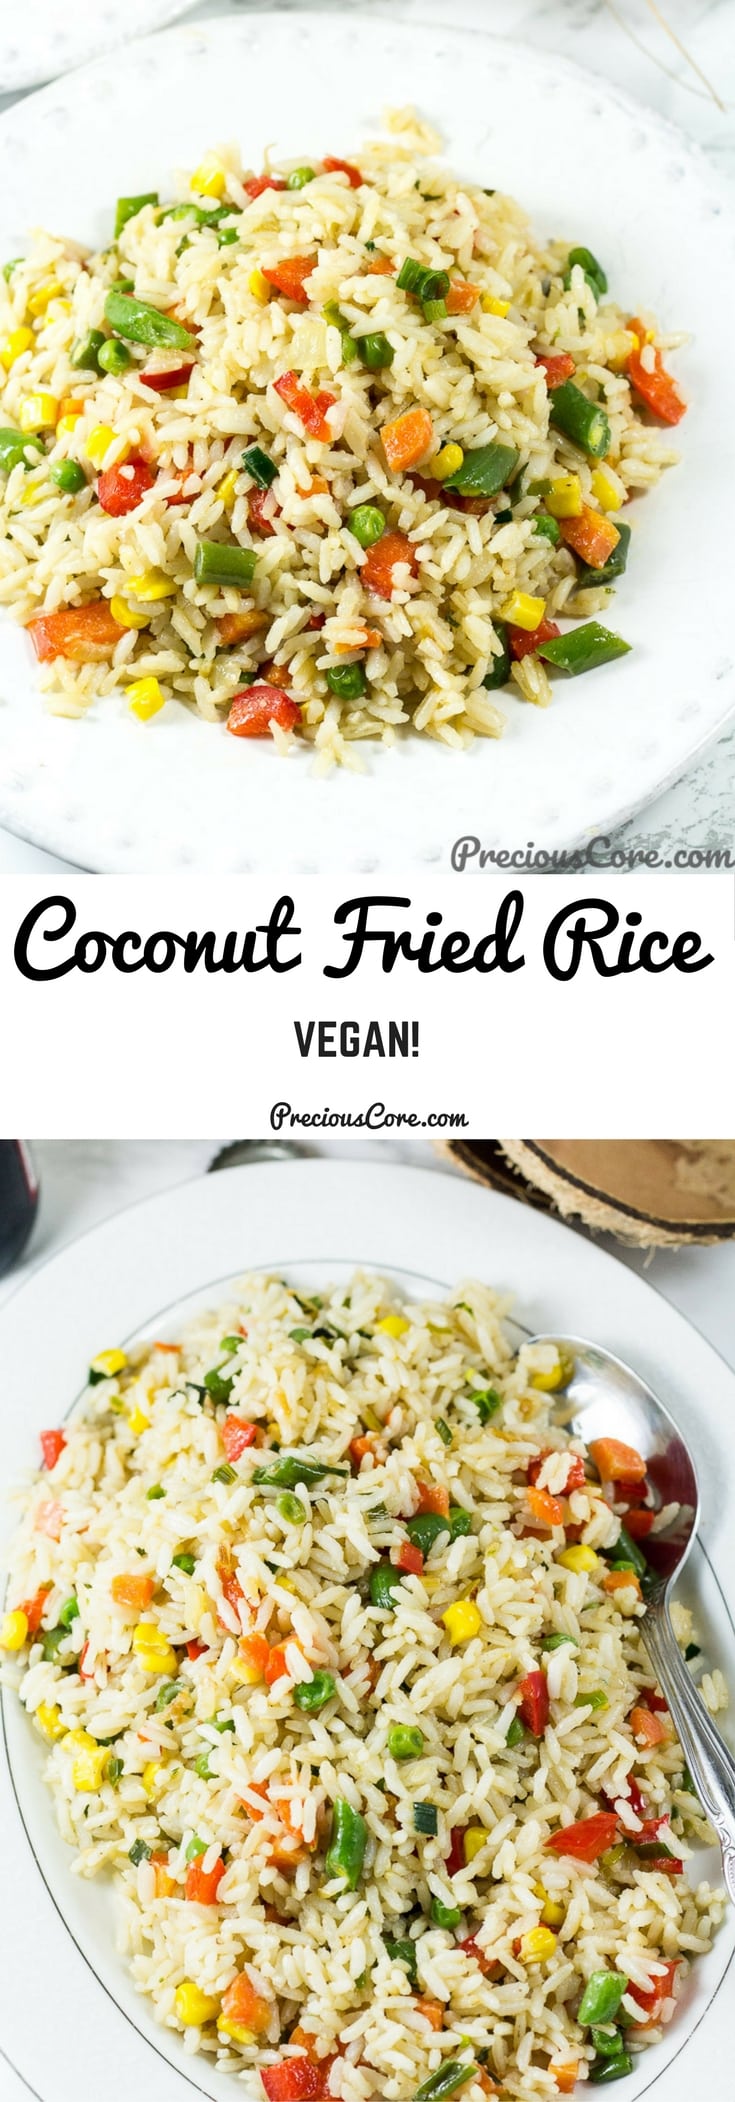 Collage with text \"Coconut Fried Rice Vegan!\"